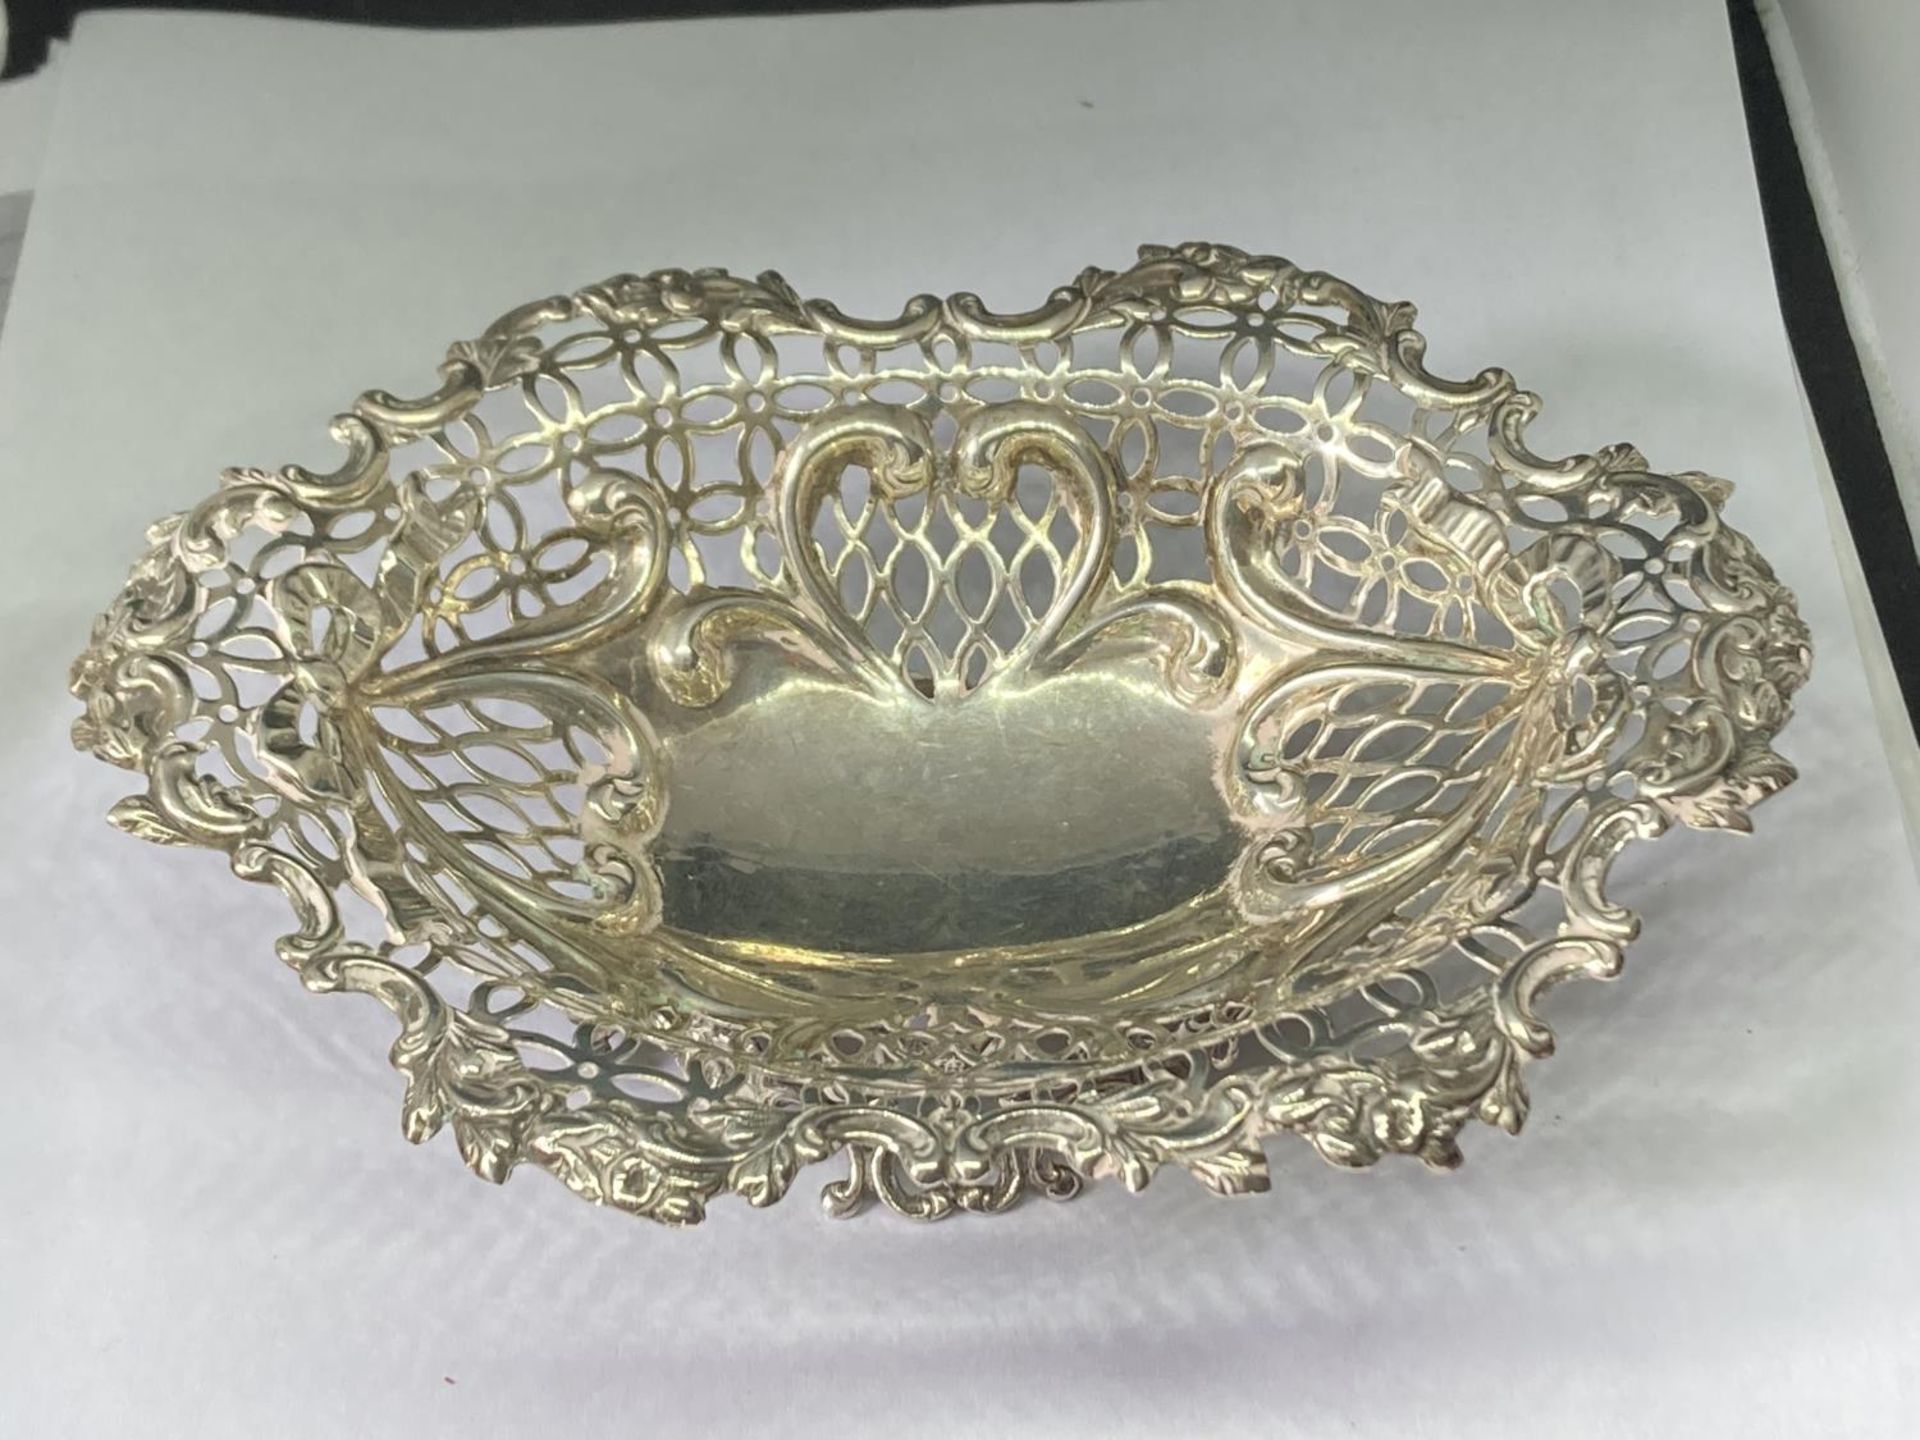 A HALLMARKED LONDON SILVER PIERCED DISH GROSS WEIGHT 122 GRAMS - Image 2 of 4